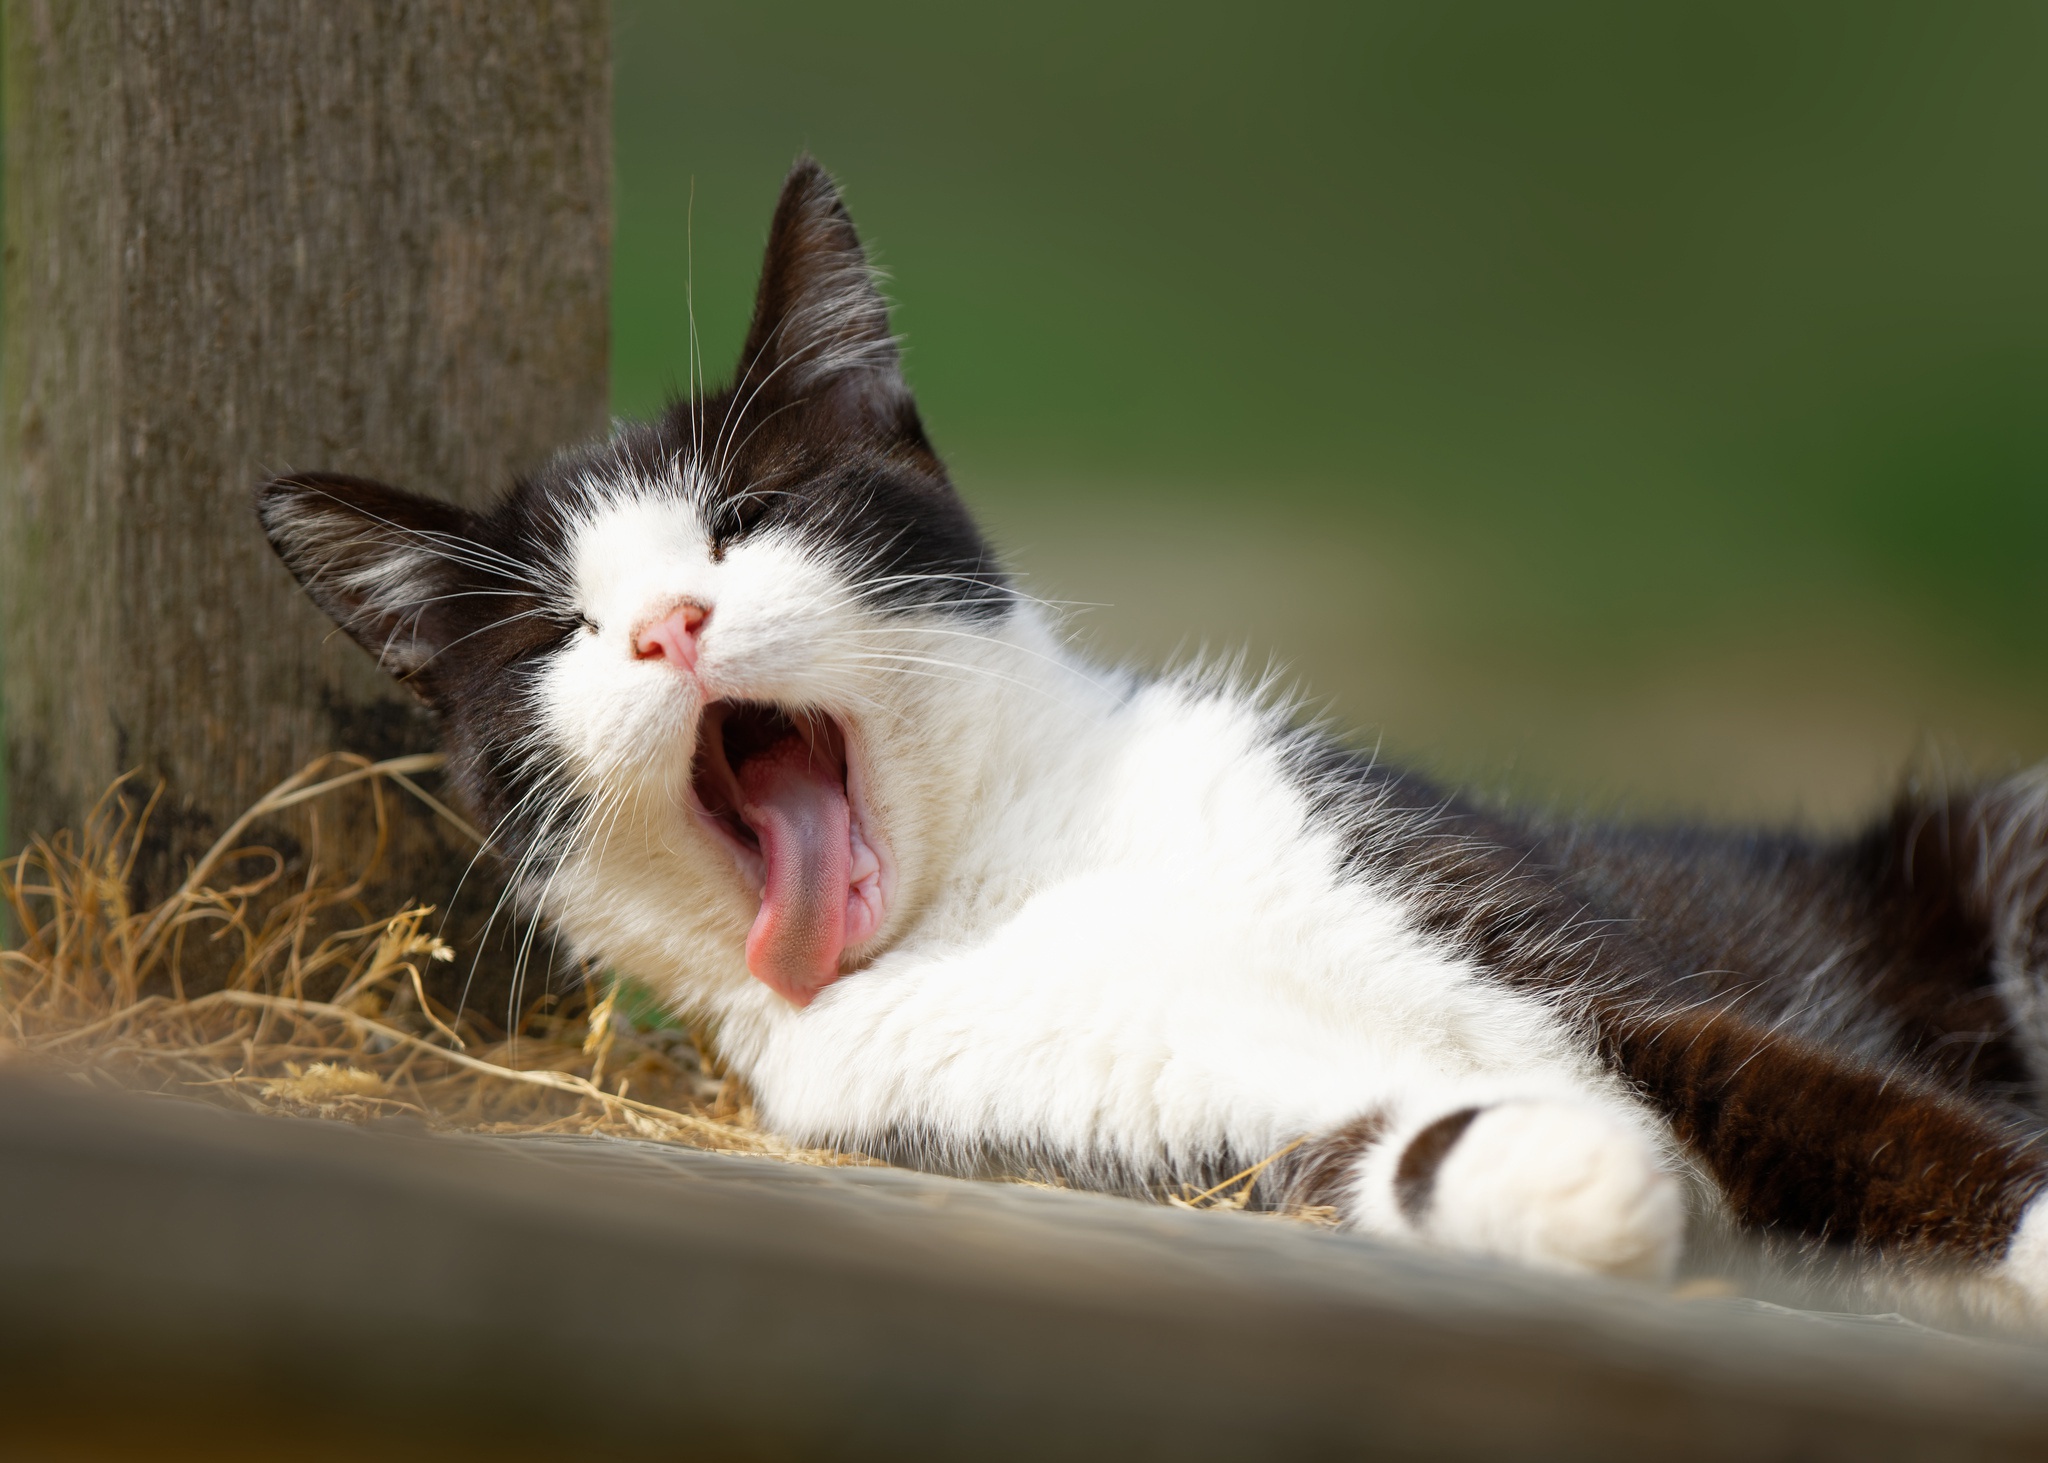 Black and white cat yawns with tongue hanging out. 